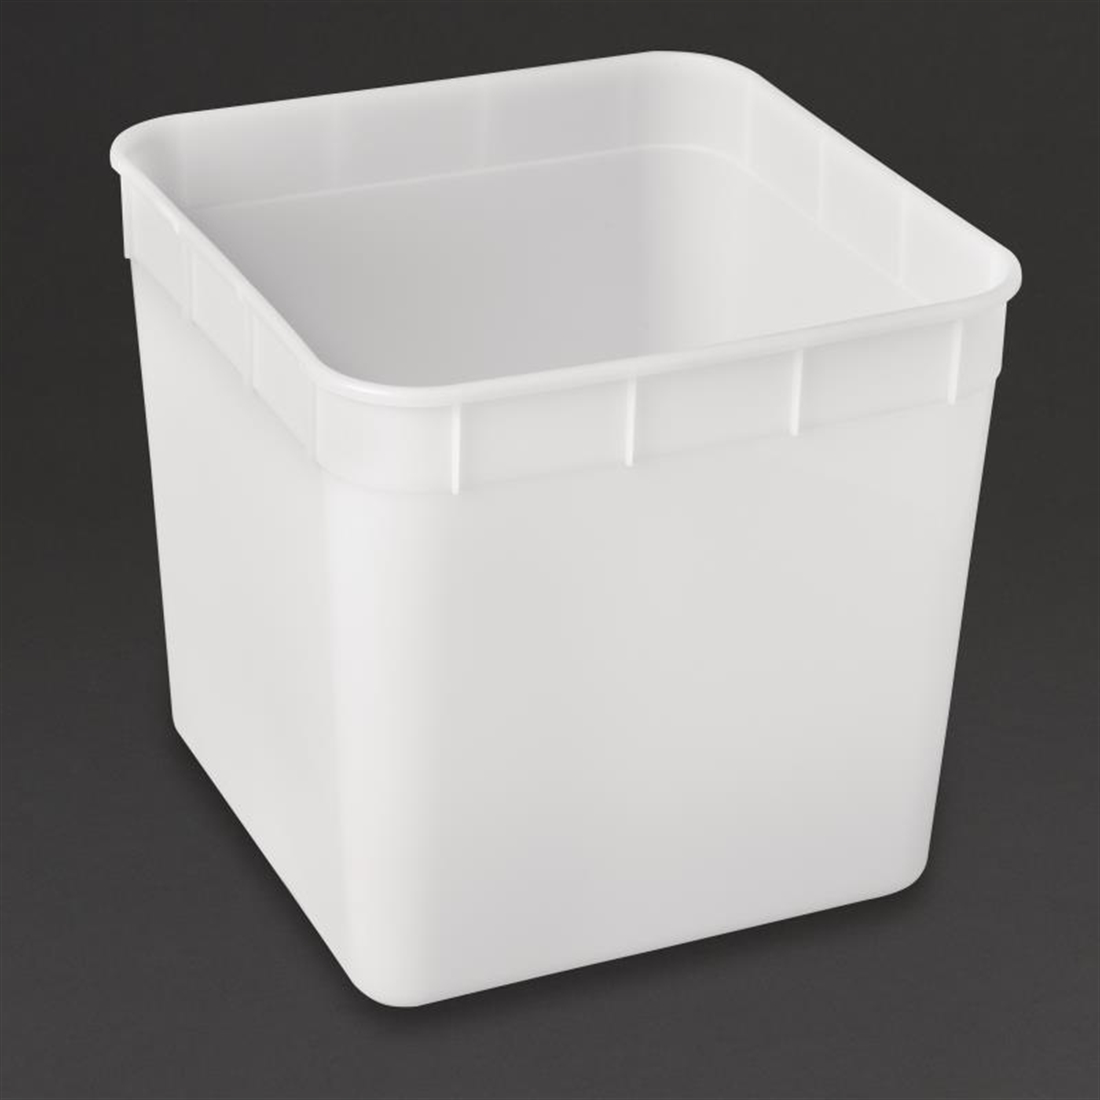 Ice Cream Containers 10Ltr